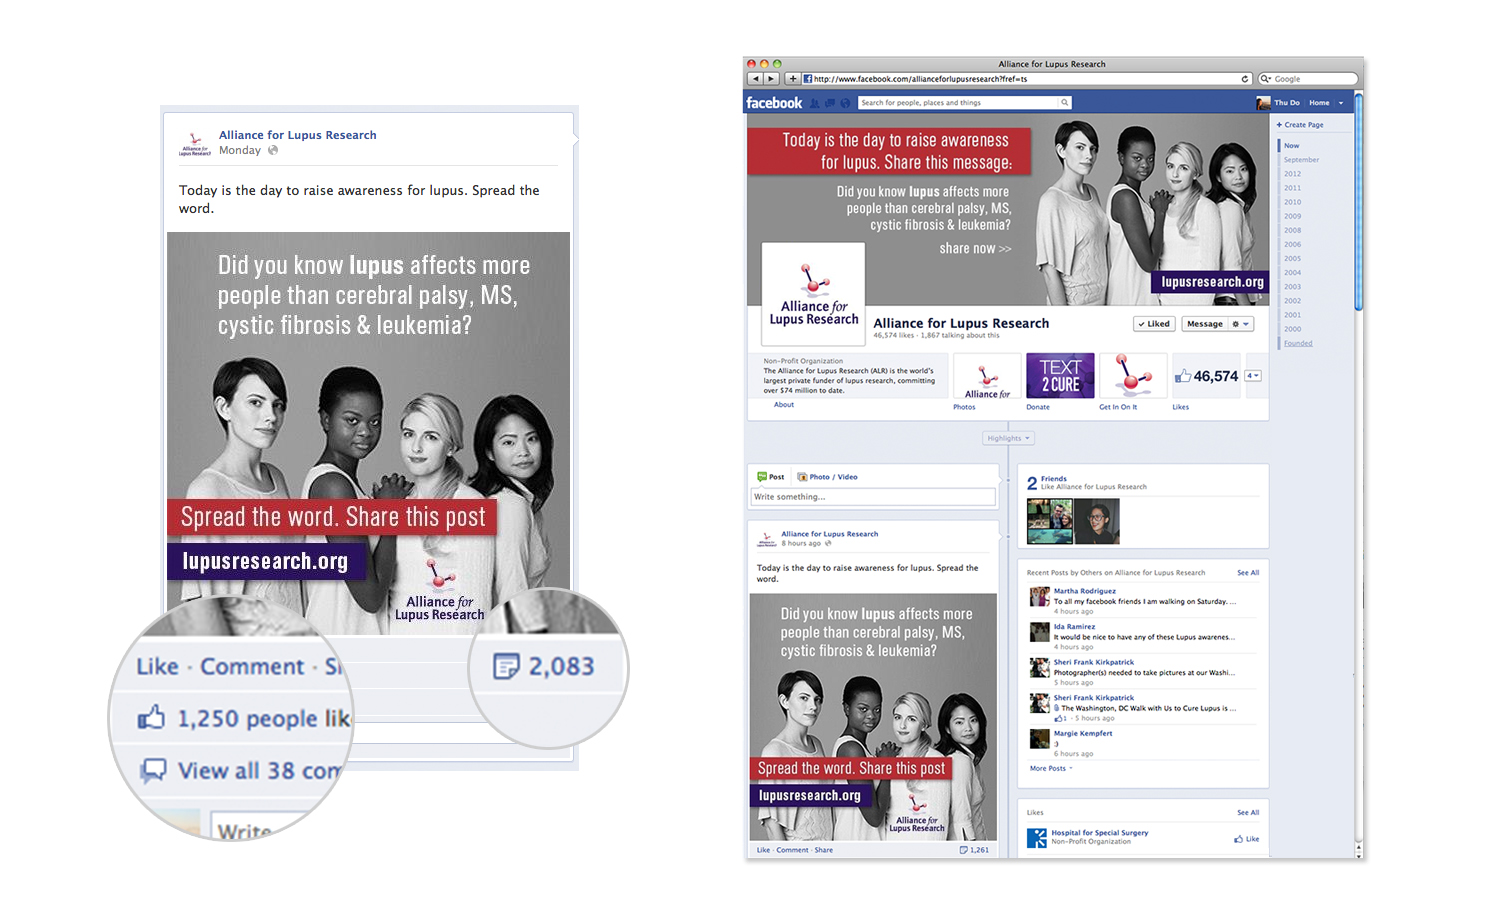 Alliance for Lupus Research Social Media Campaign Facebook